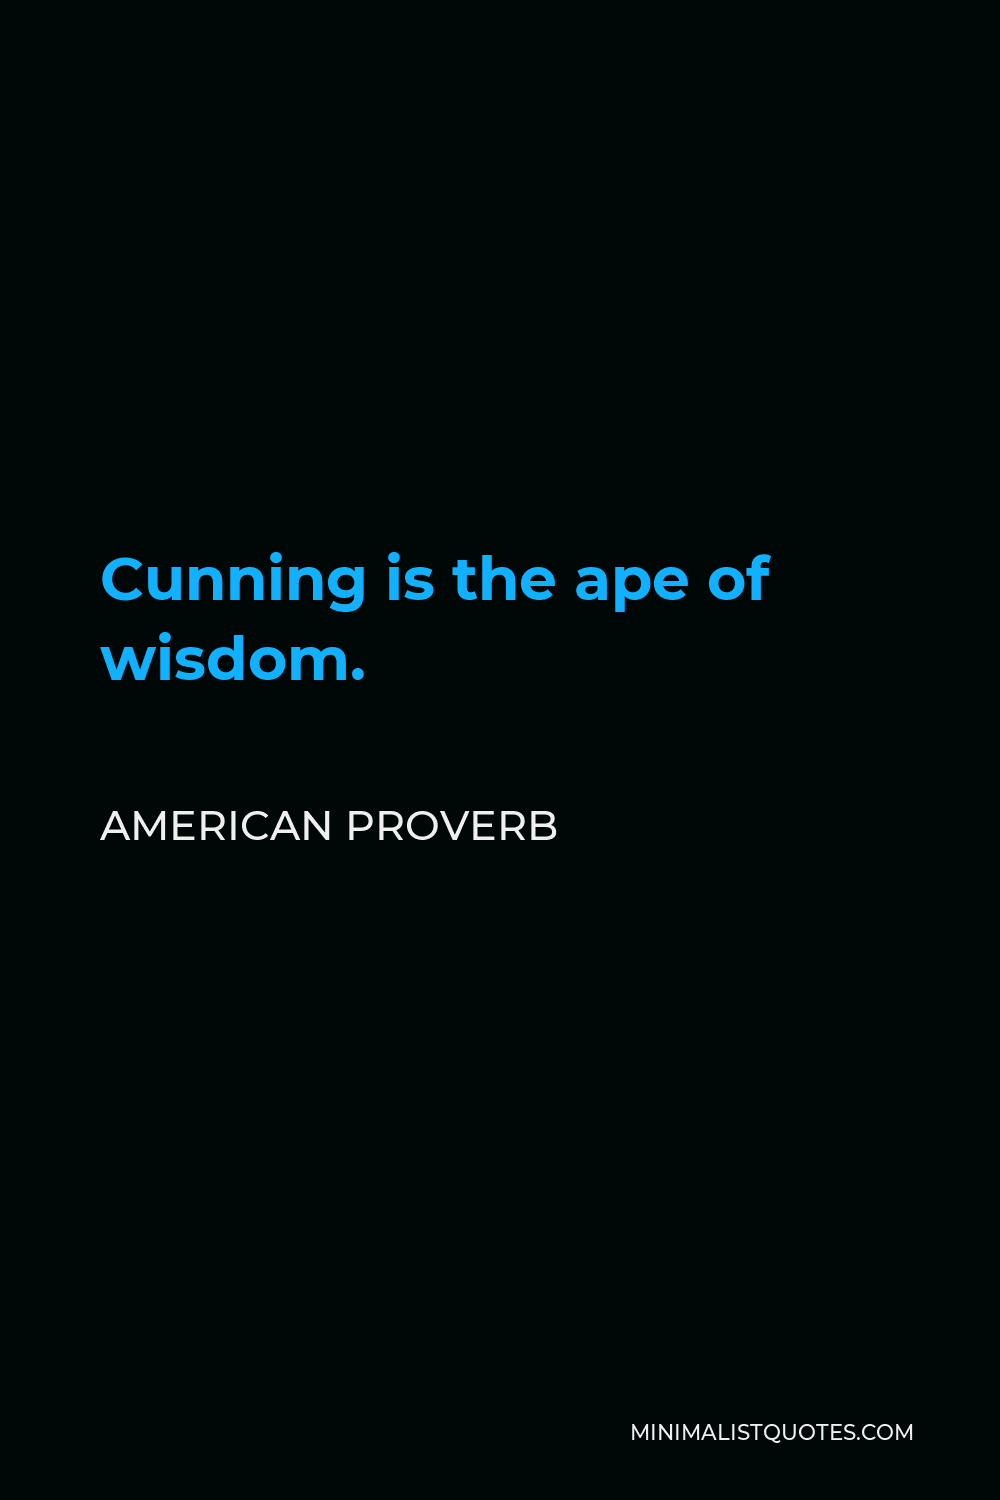 American Proverb Quote - Cunning is the ape of wisdom.